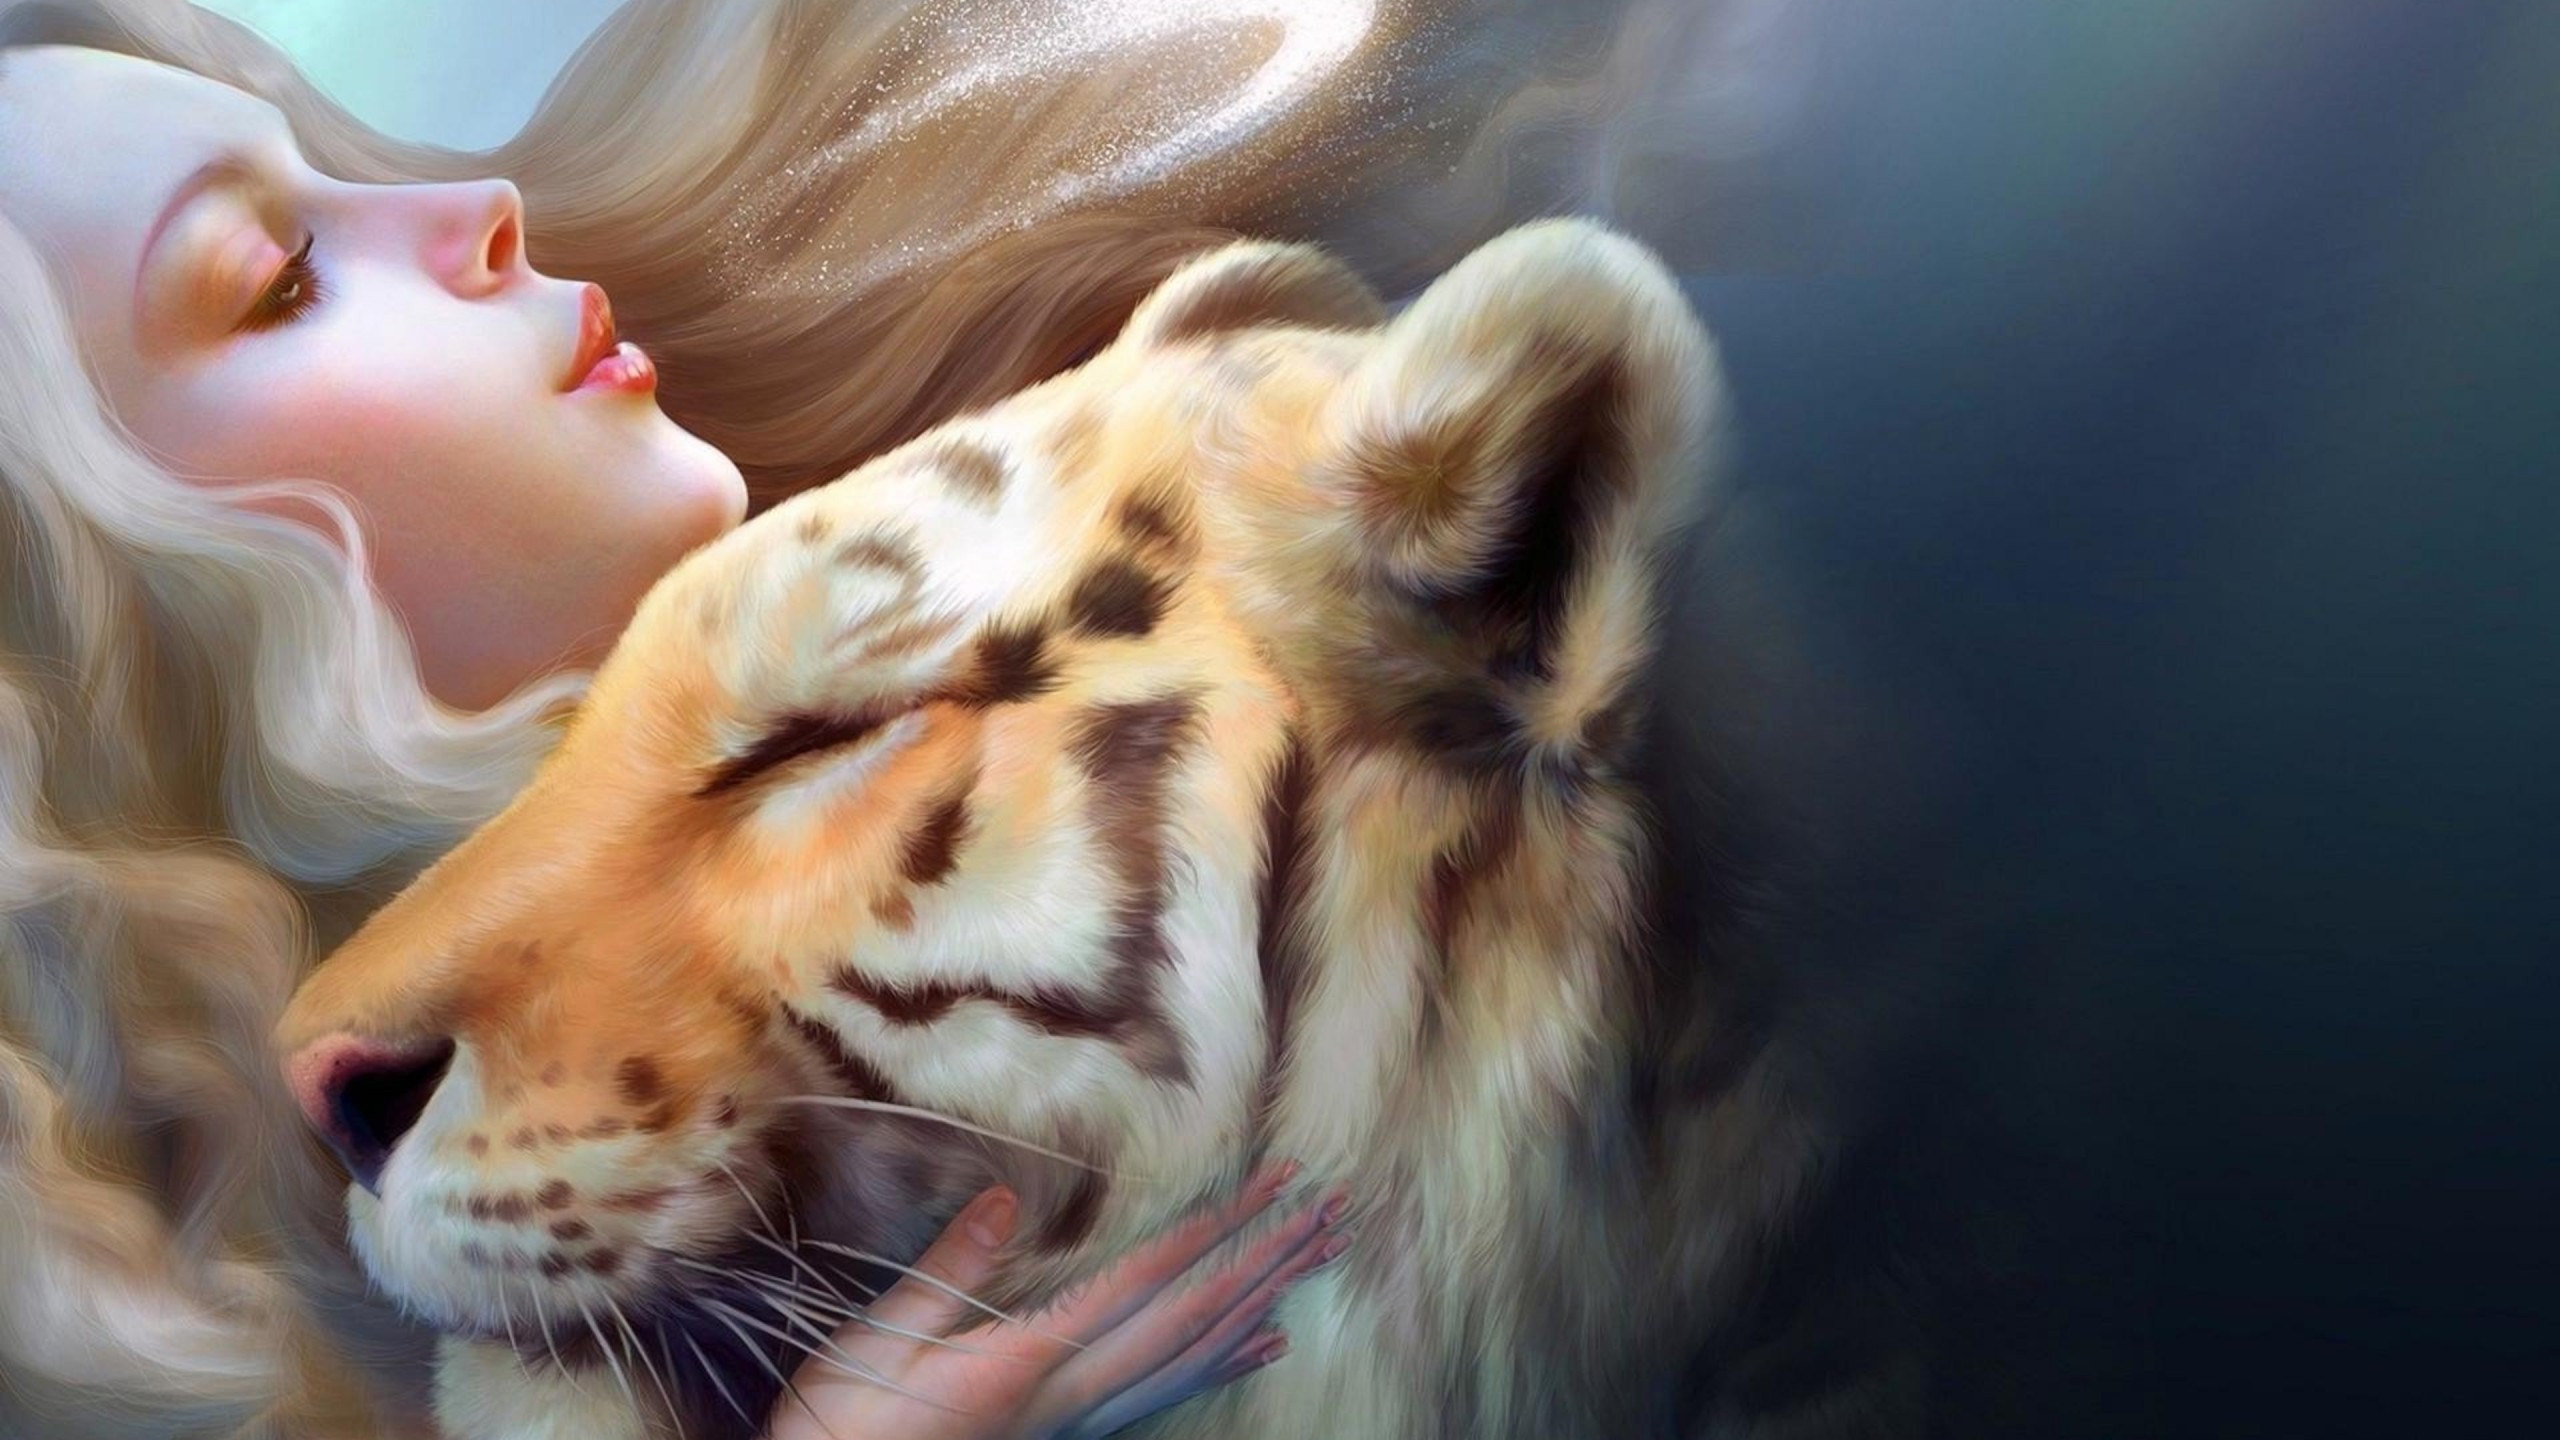 Russian Women With Tiger Illustration Wallpapers